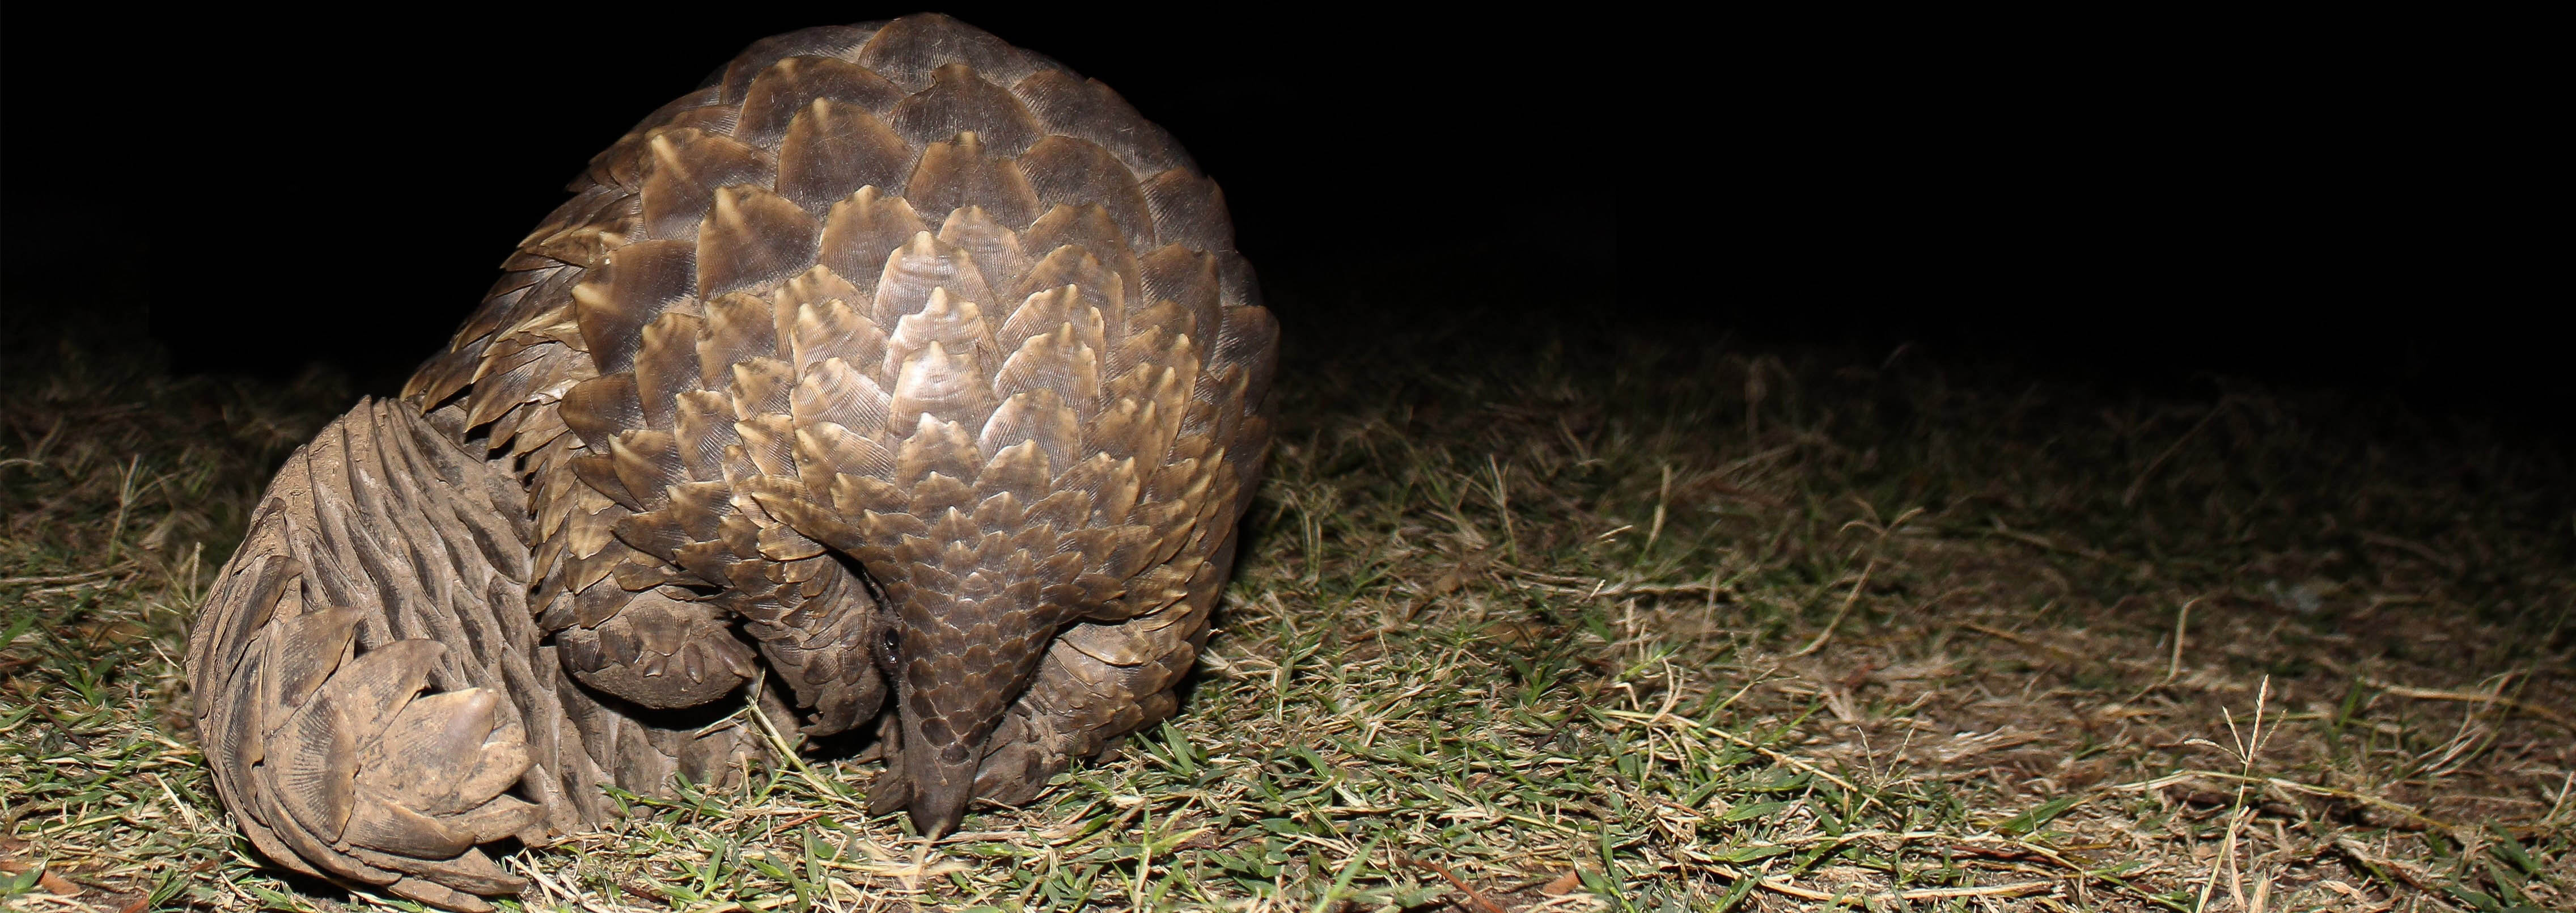 Pangolin in South Africa | Josh Tough, Audley Travel